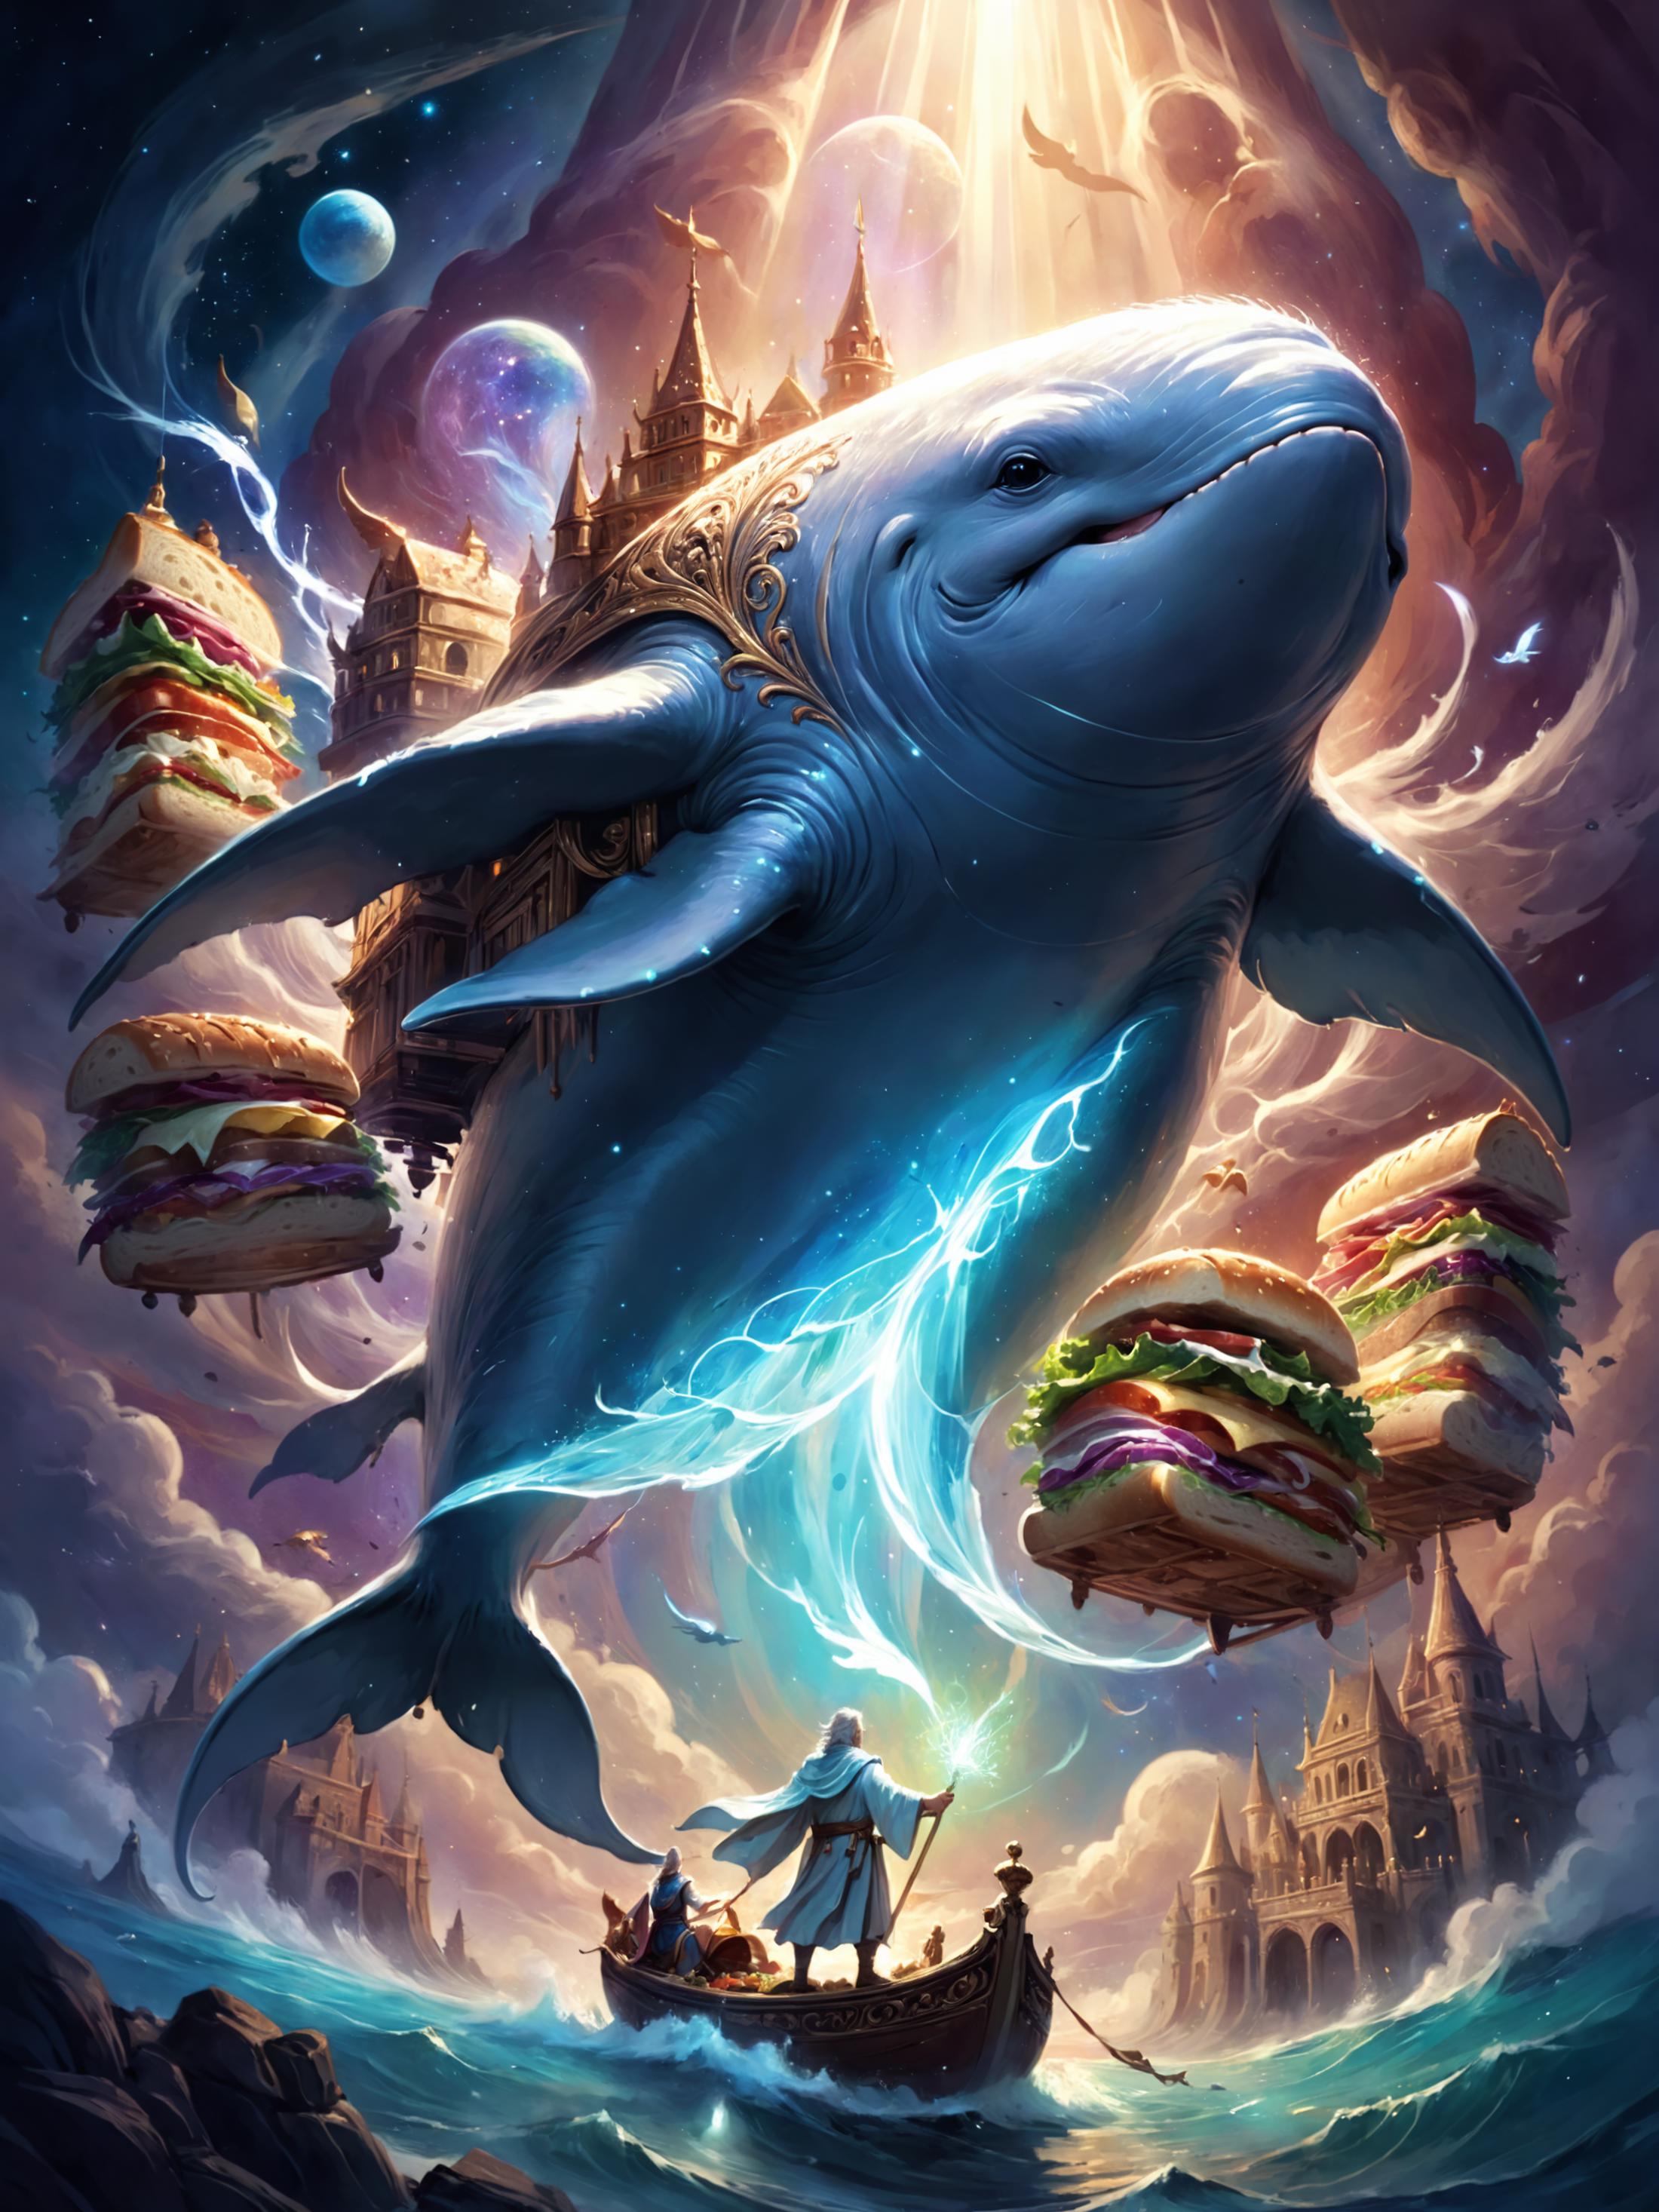 A whimsical painting of a man holding a staff in front of a blue whale with sandwiches on its back.